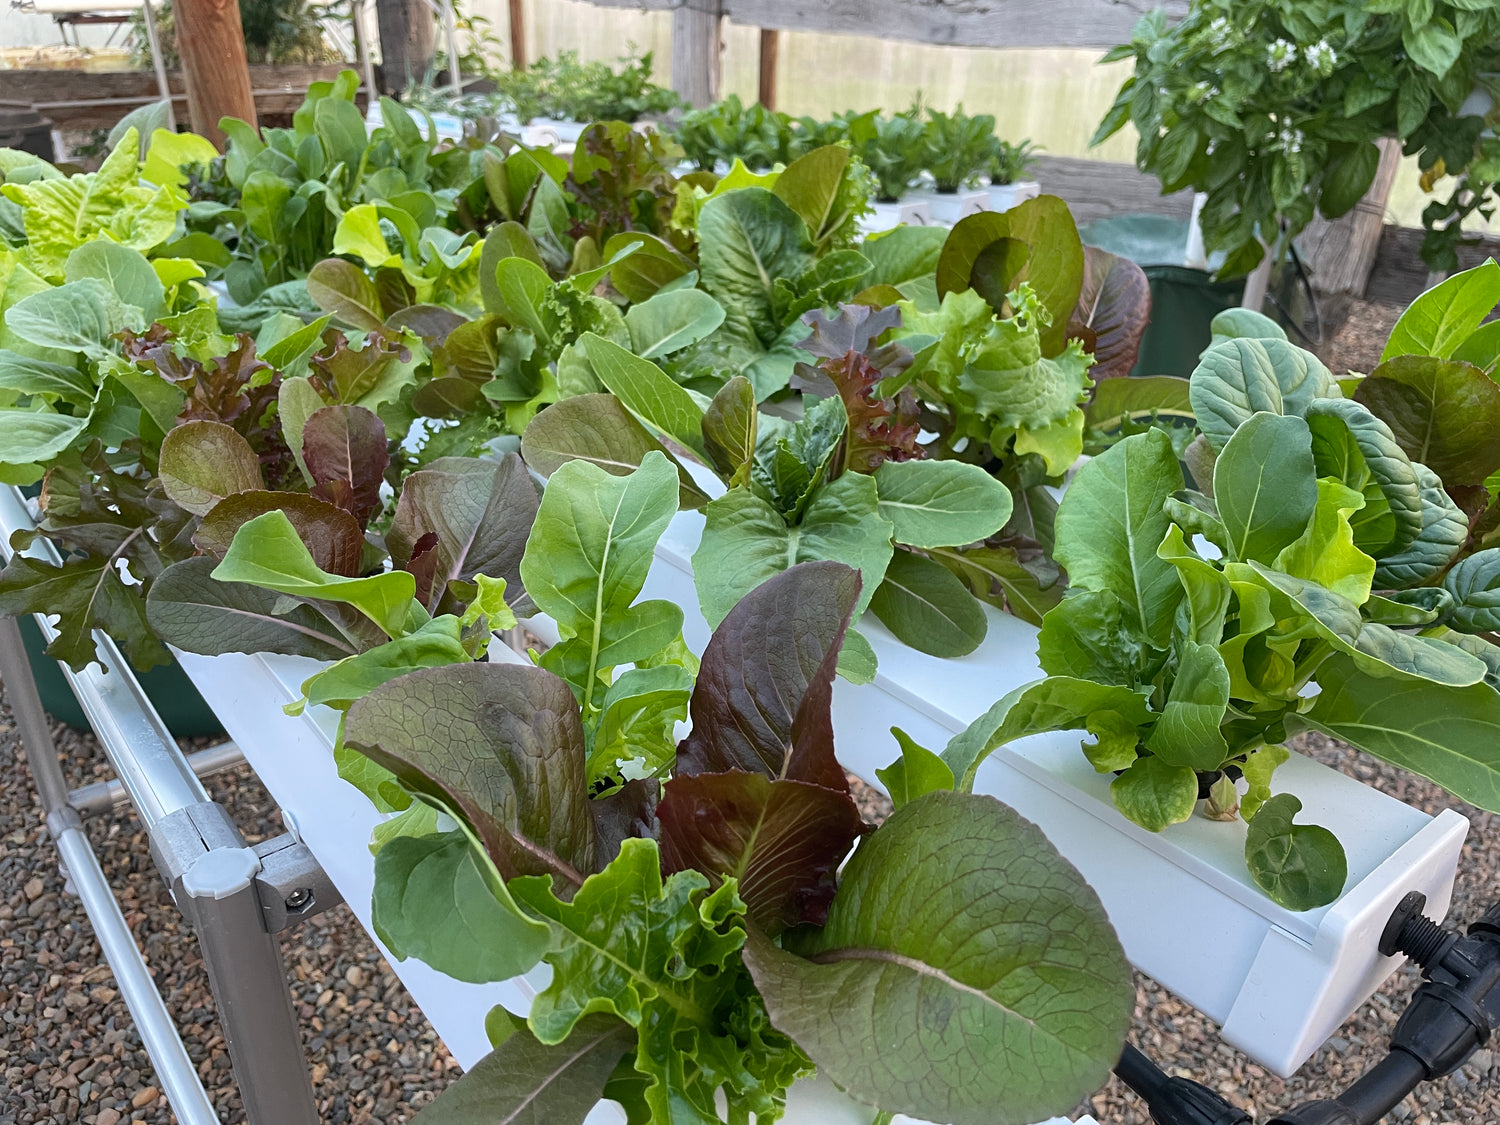 How To Grow A Sustainable Future With Hydroponic Gardening